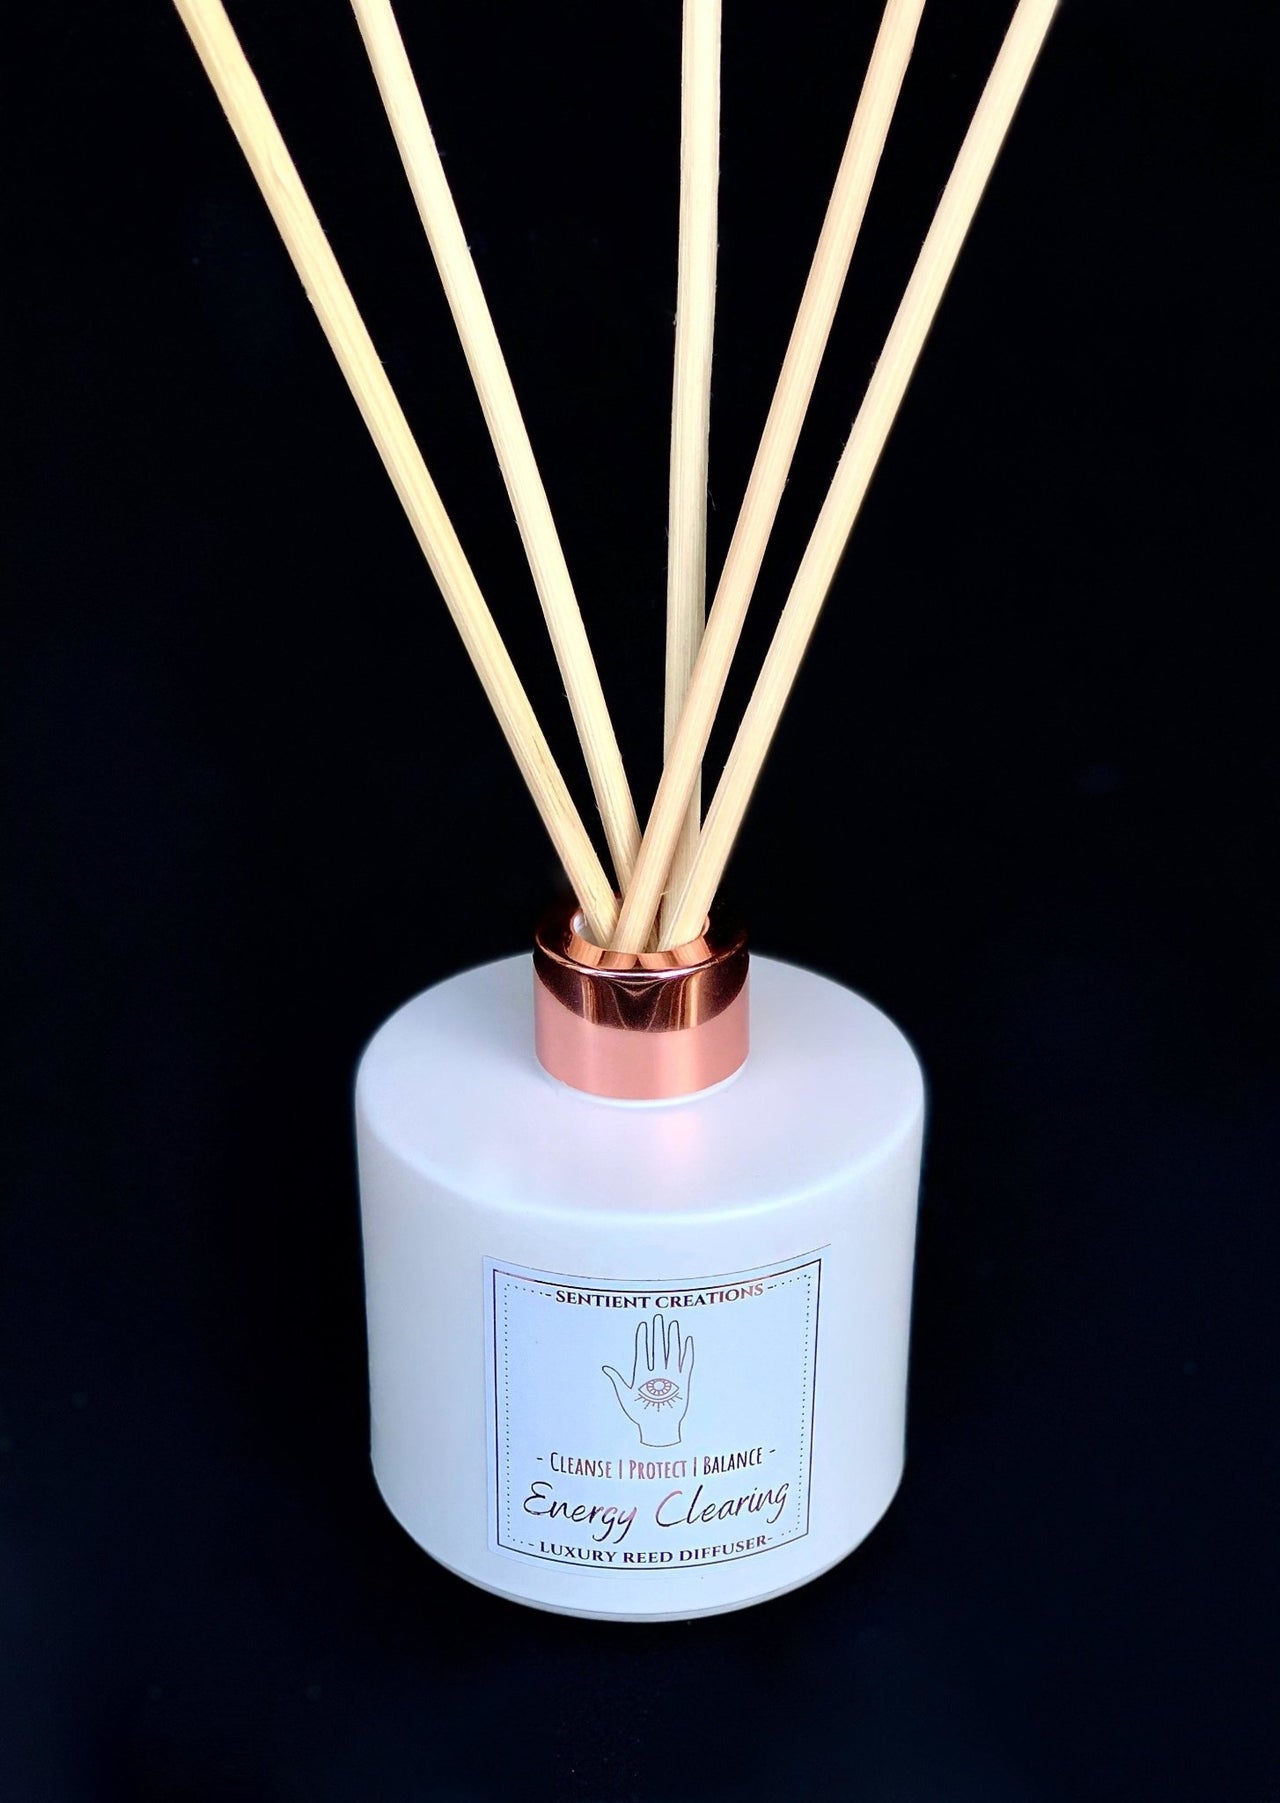 "I Release" Energy Cleansing Luxury Reed Diffuser - Sentient Creations